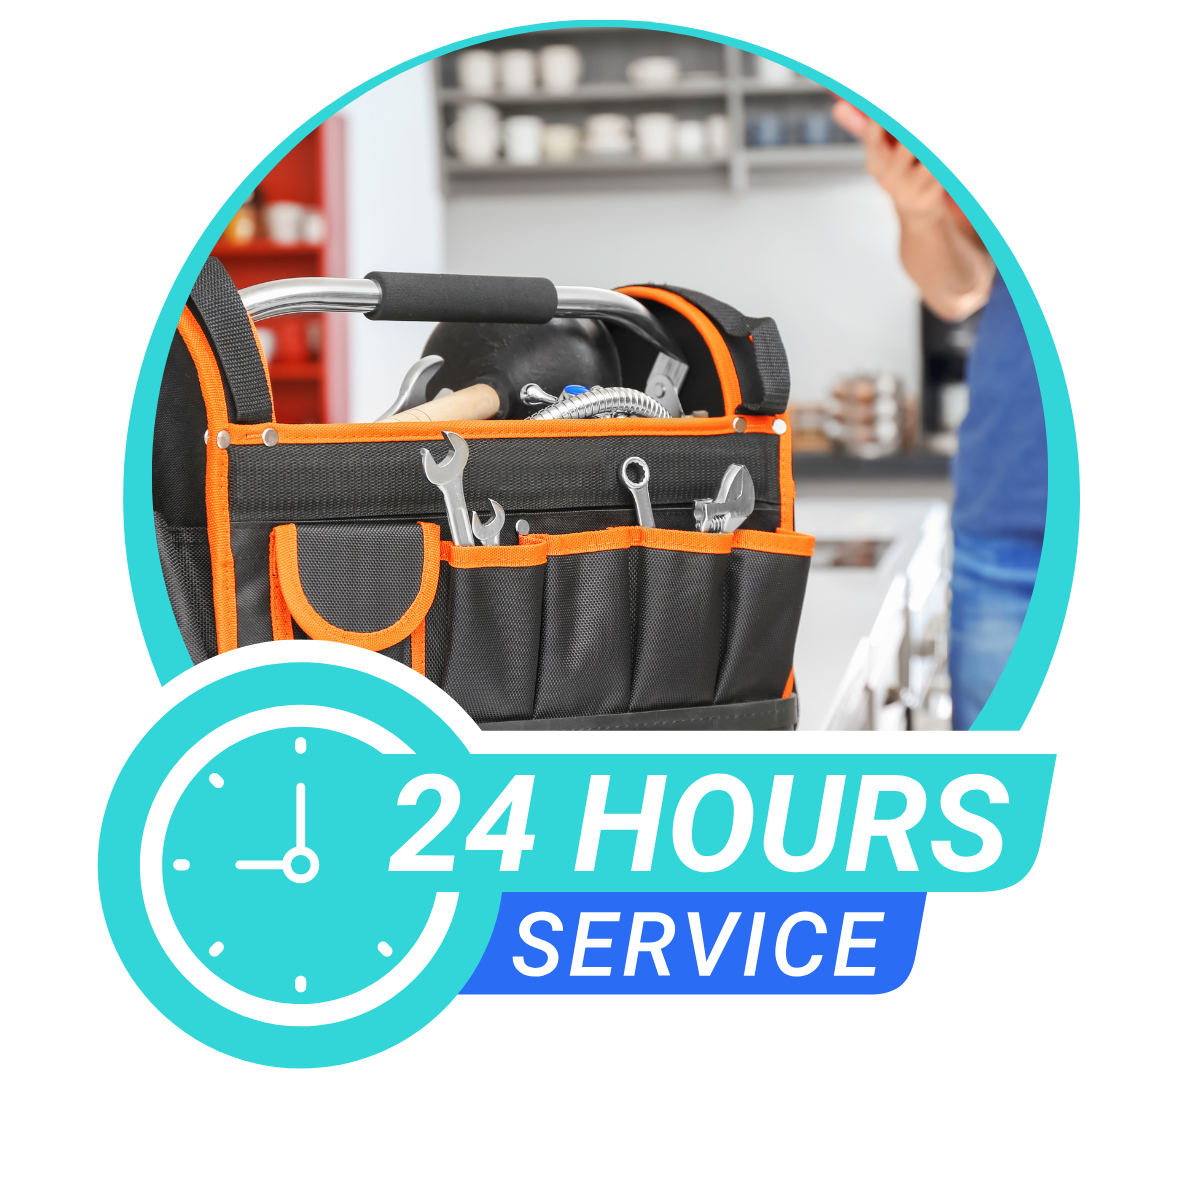 image presents 24/7 plumbing services